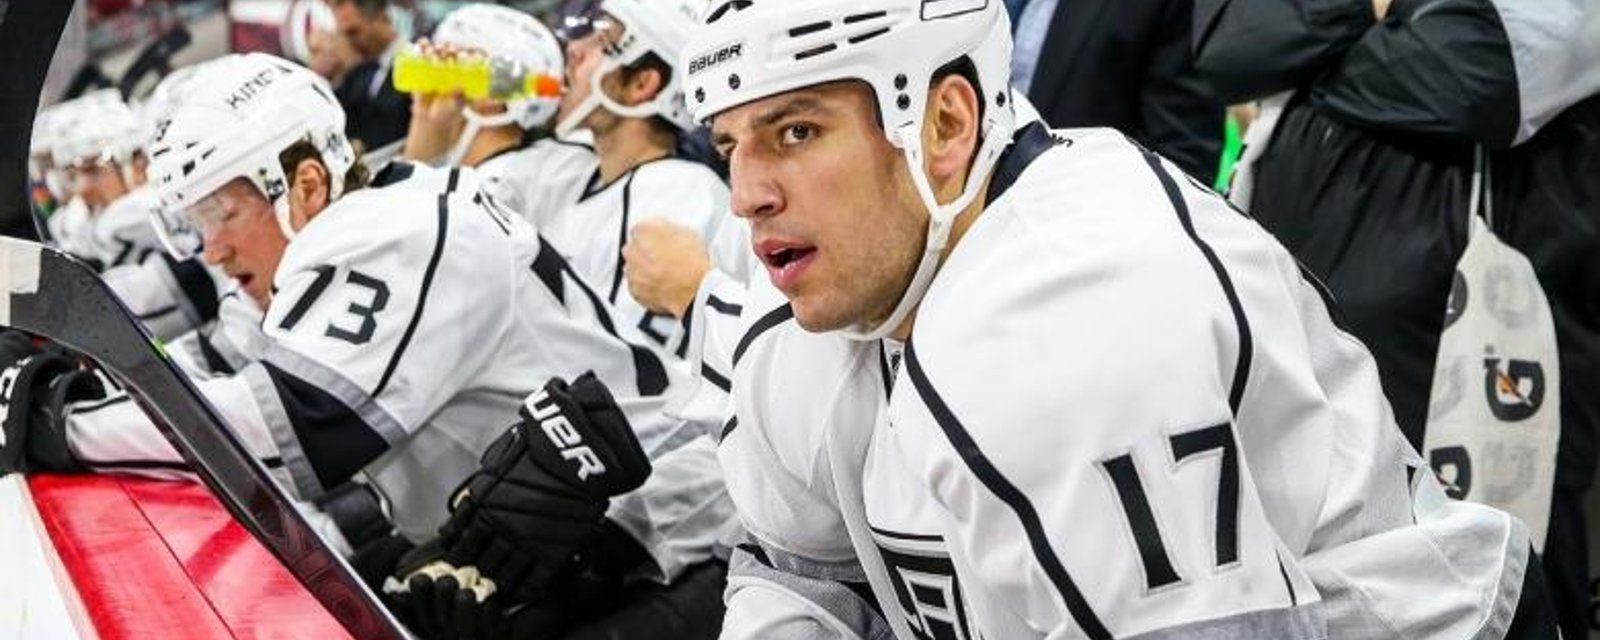 Breaking: Lucic has signed a massive new contract.